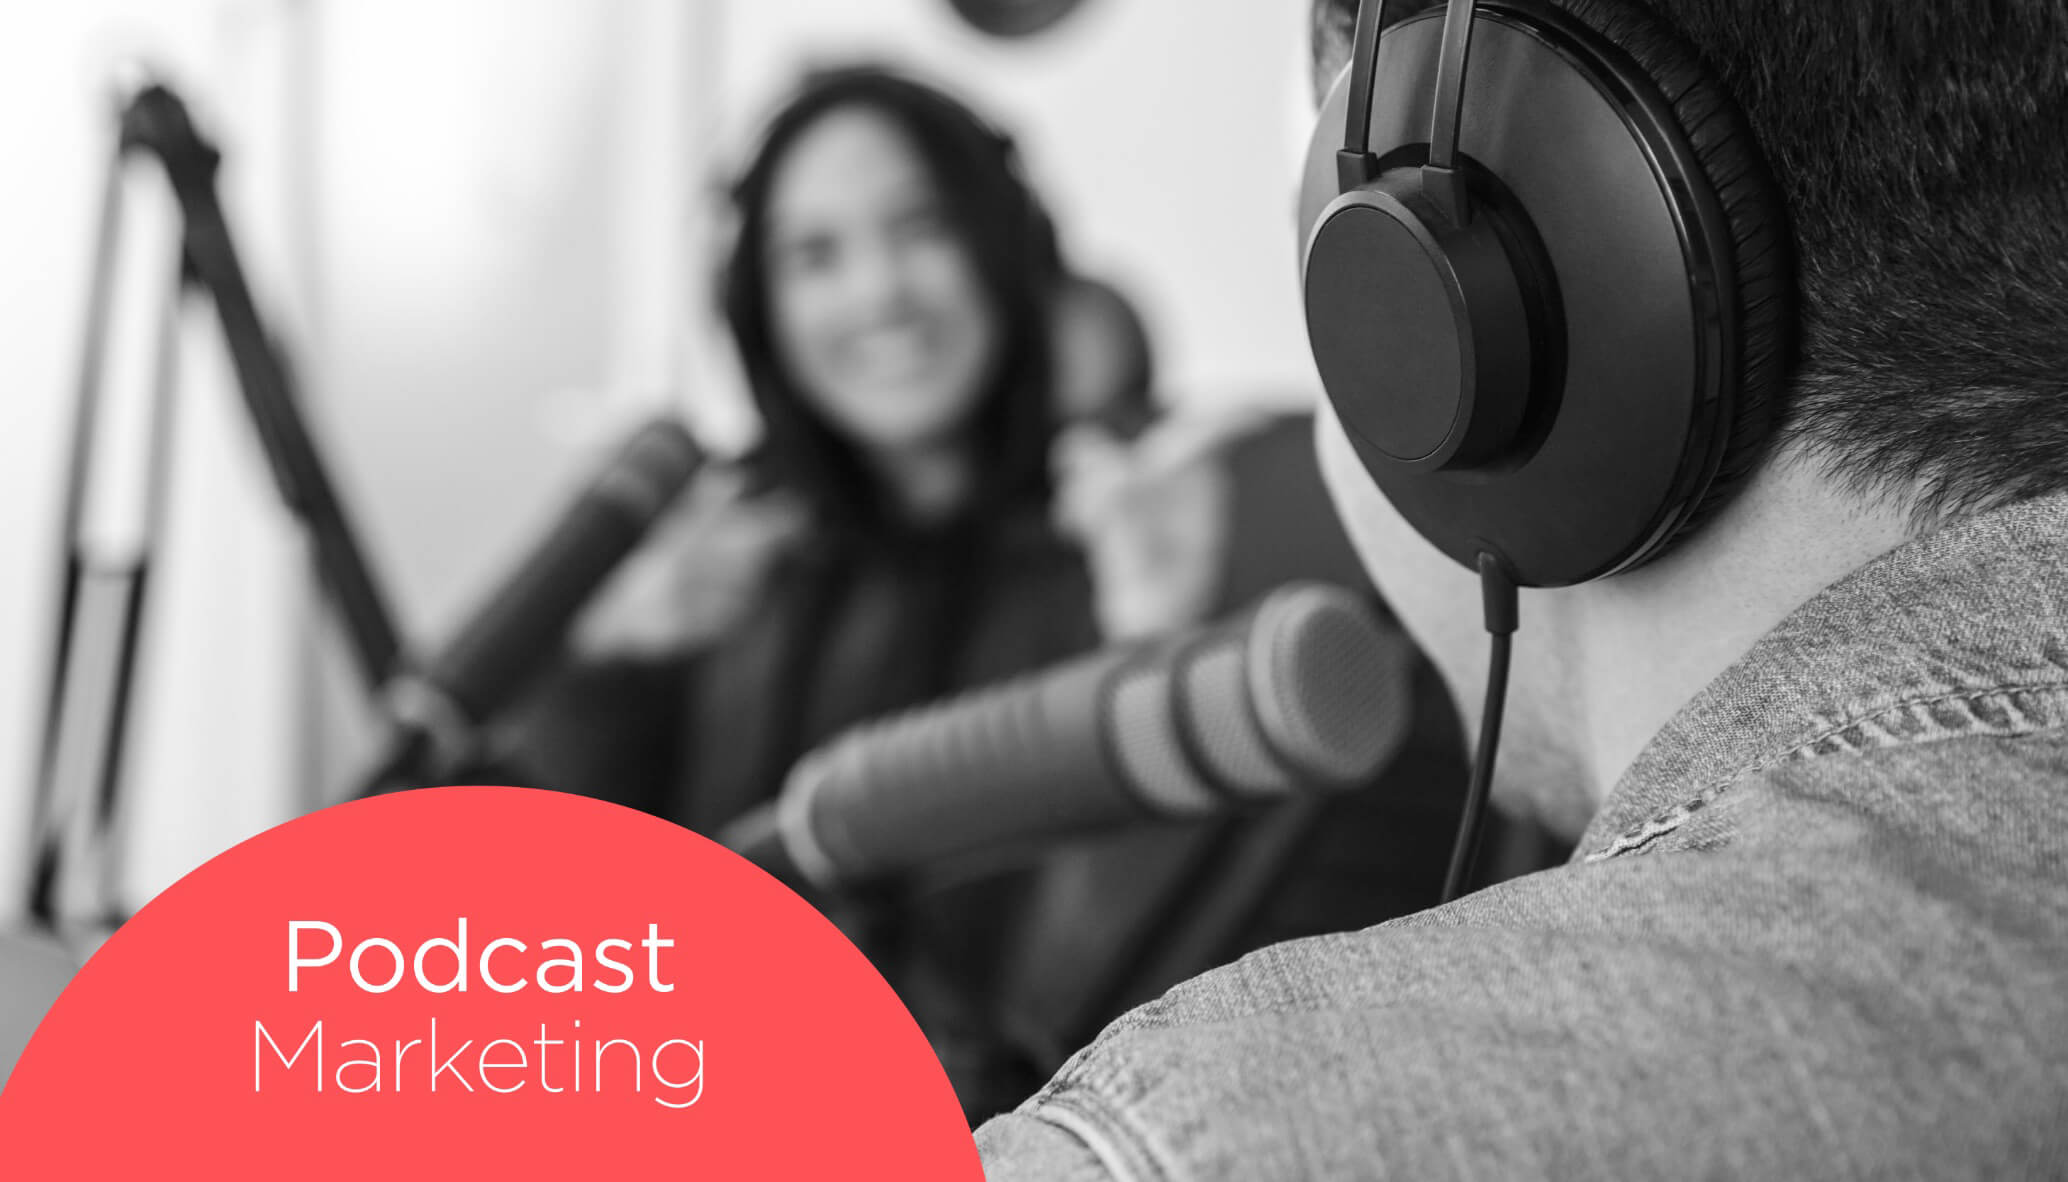 How to include Podcasts in your Marketing Strategy.